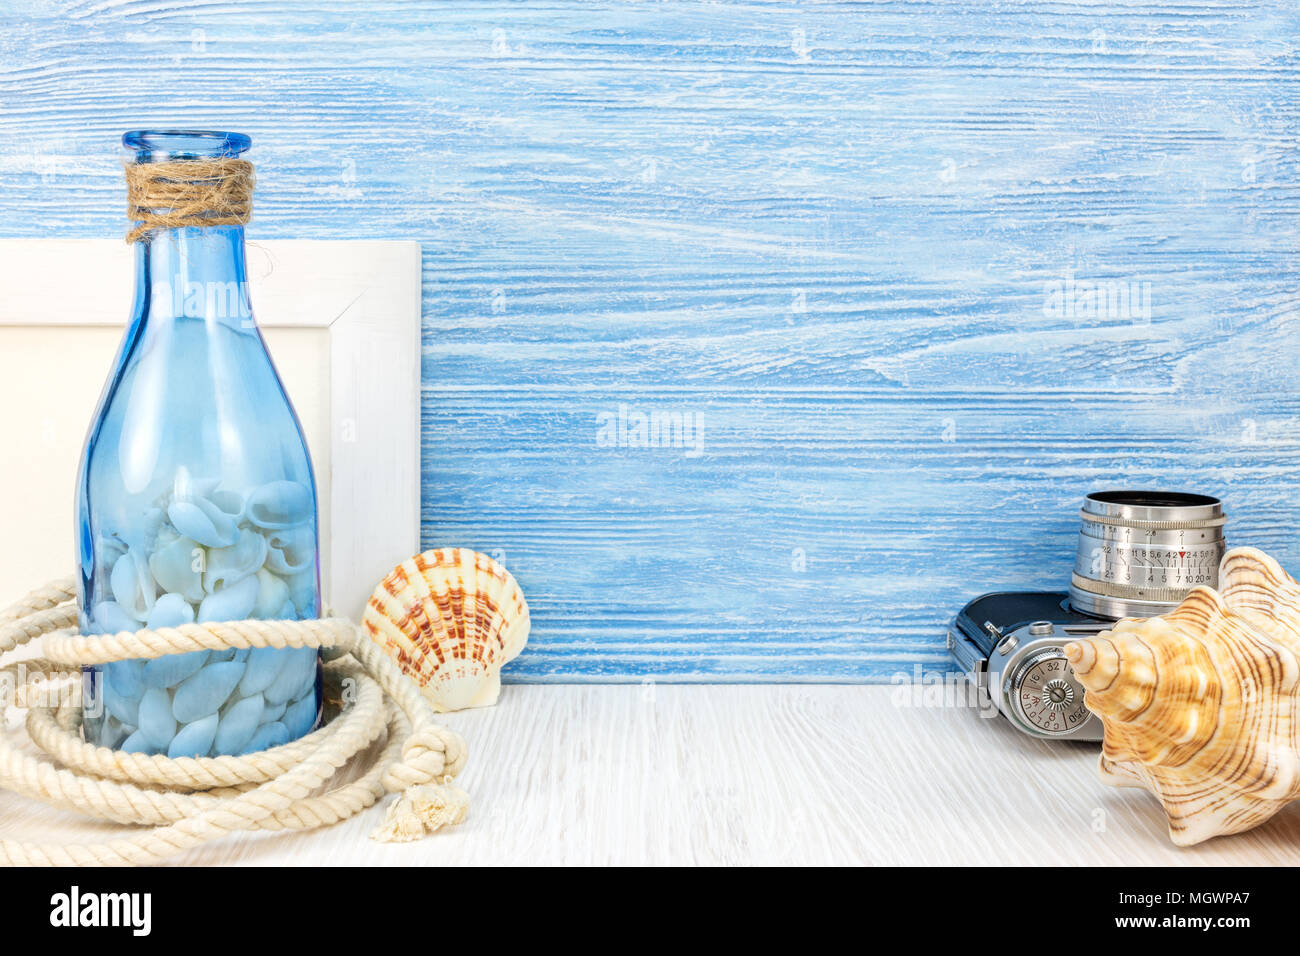 old photo camera, frame, various seashells, marine rope and bottle on blue wooden boards background Stock Photo